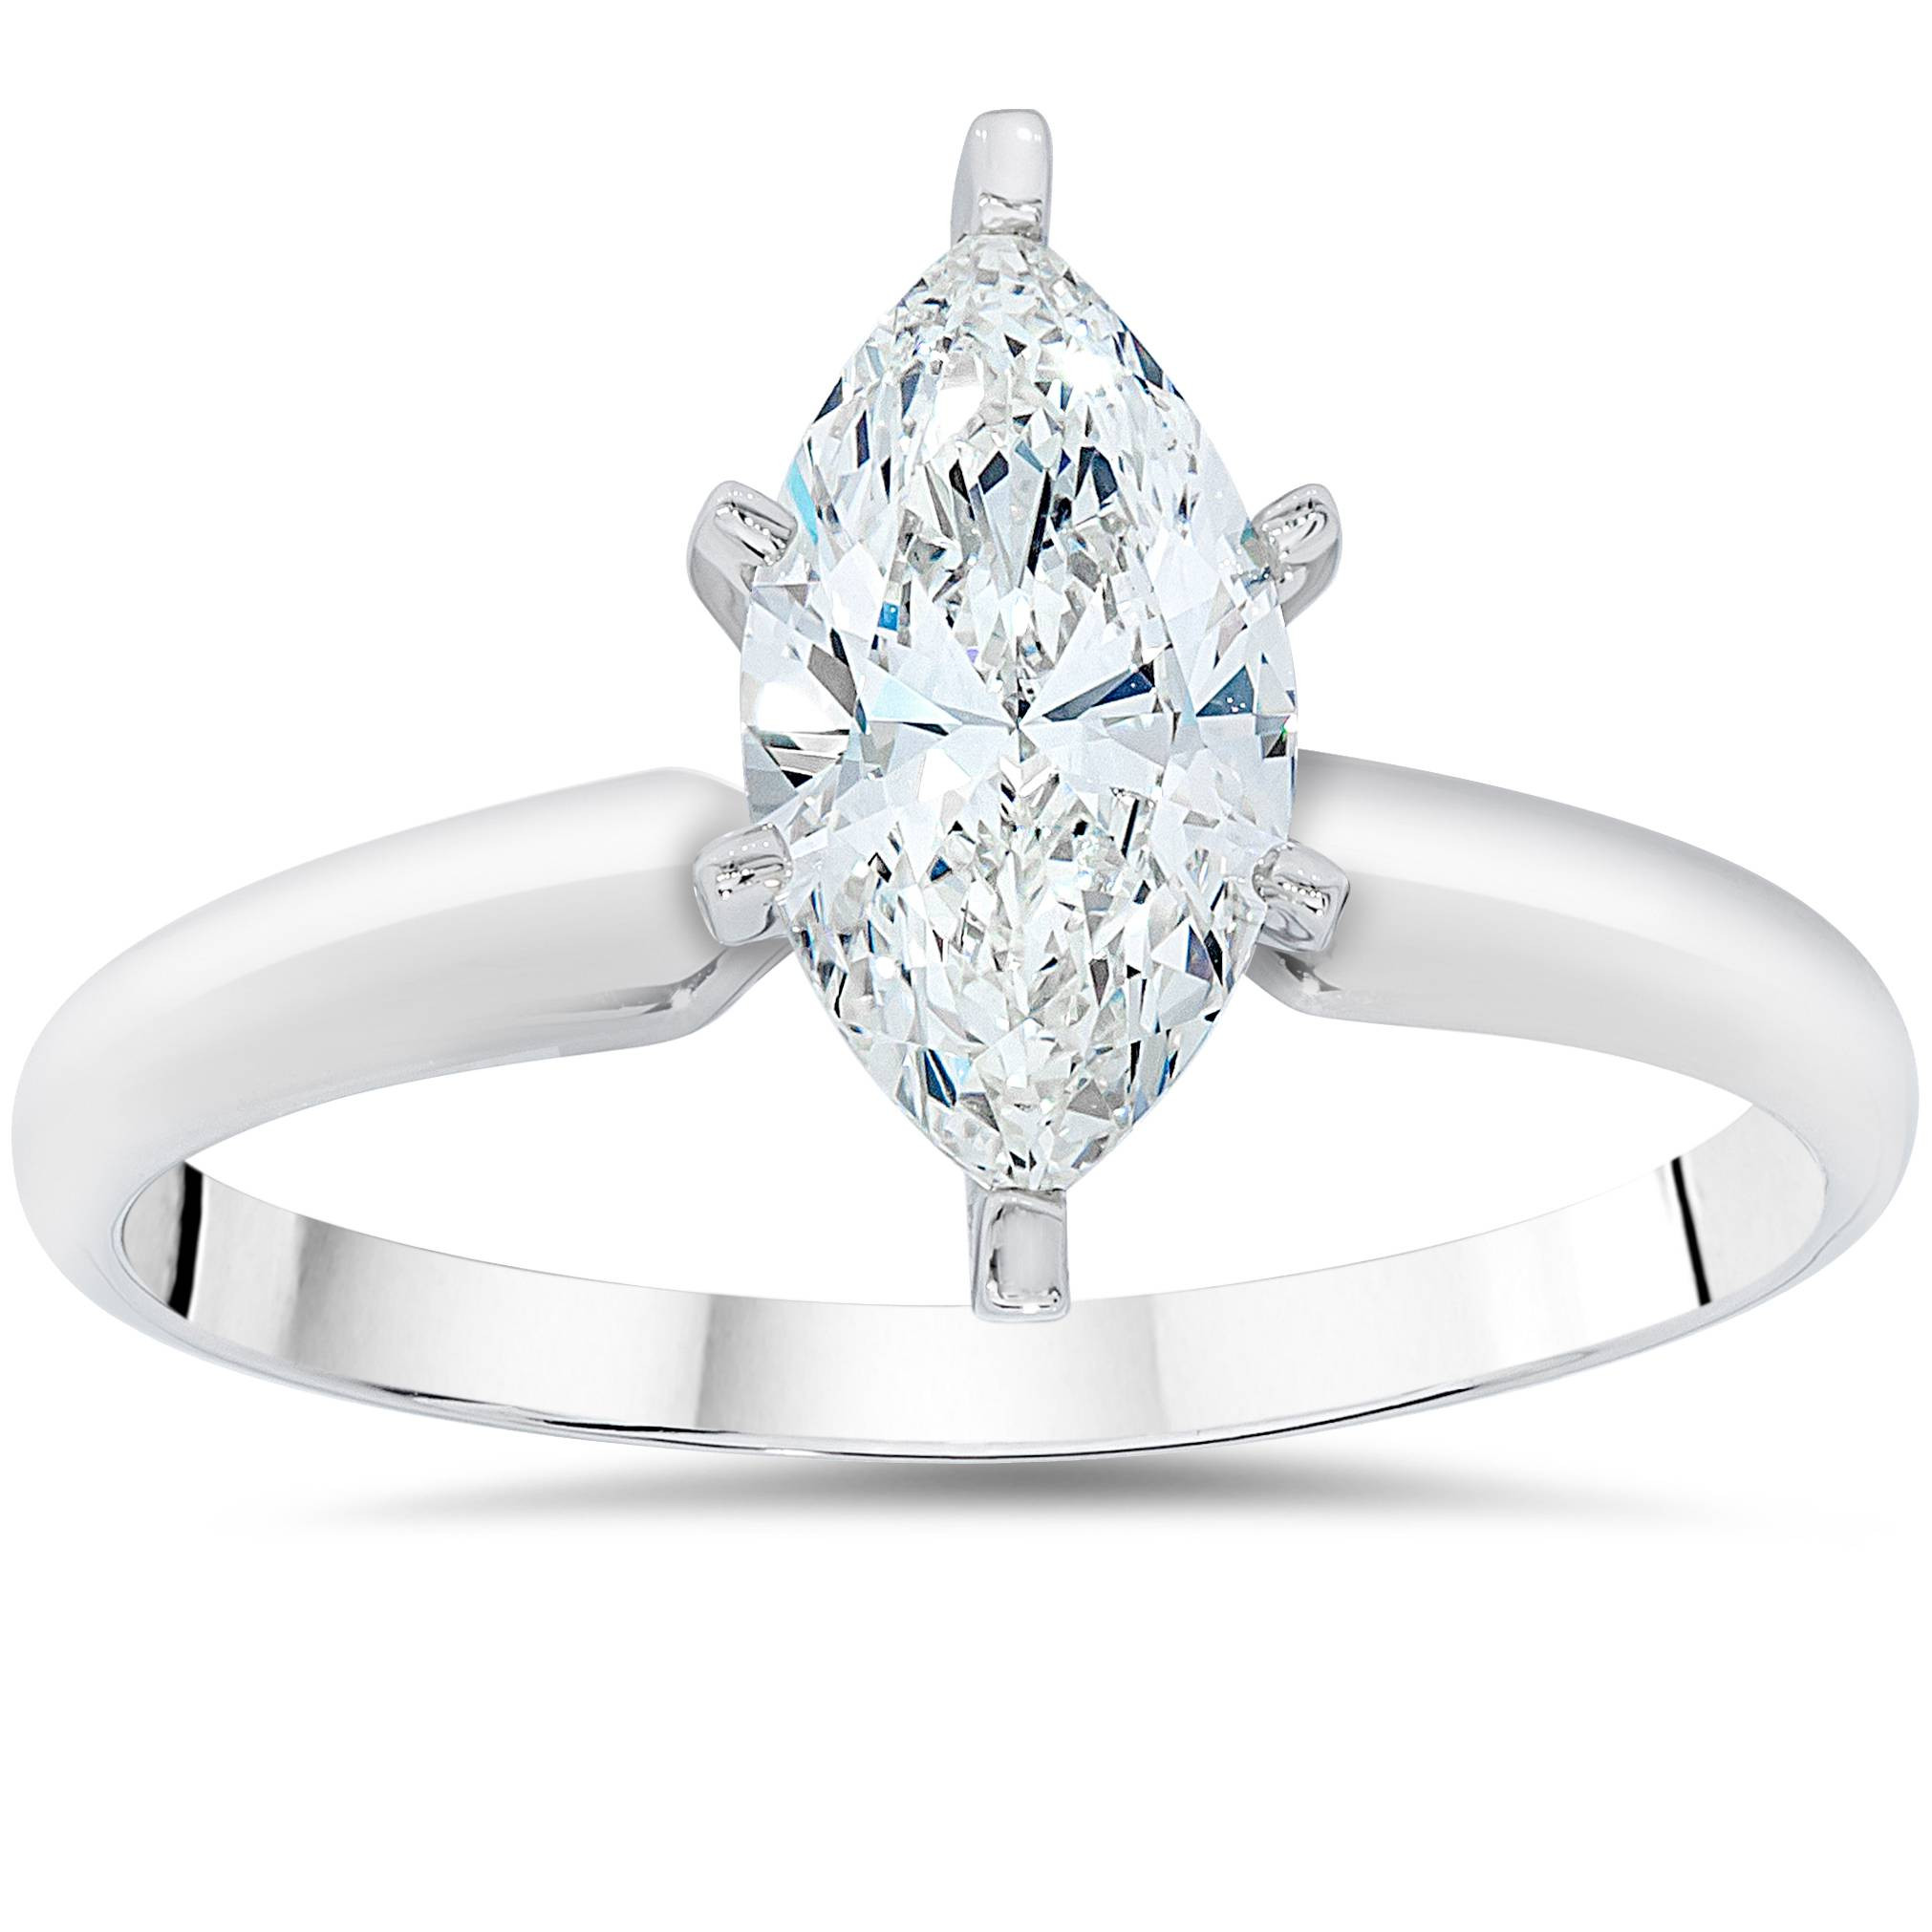 Marquise Cut Diamond Engagement Ring
 1ct Solitaire Marquise Enhanced Diamond Engagement Ring